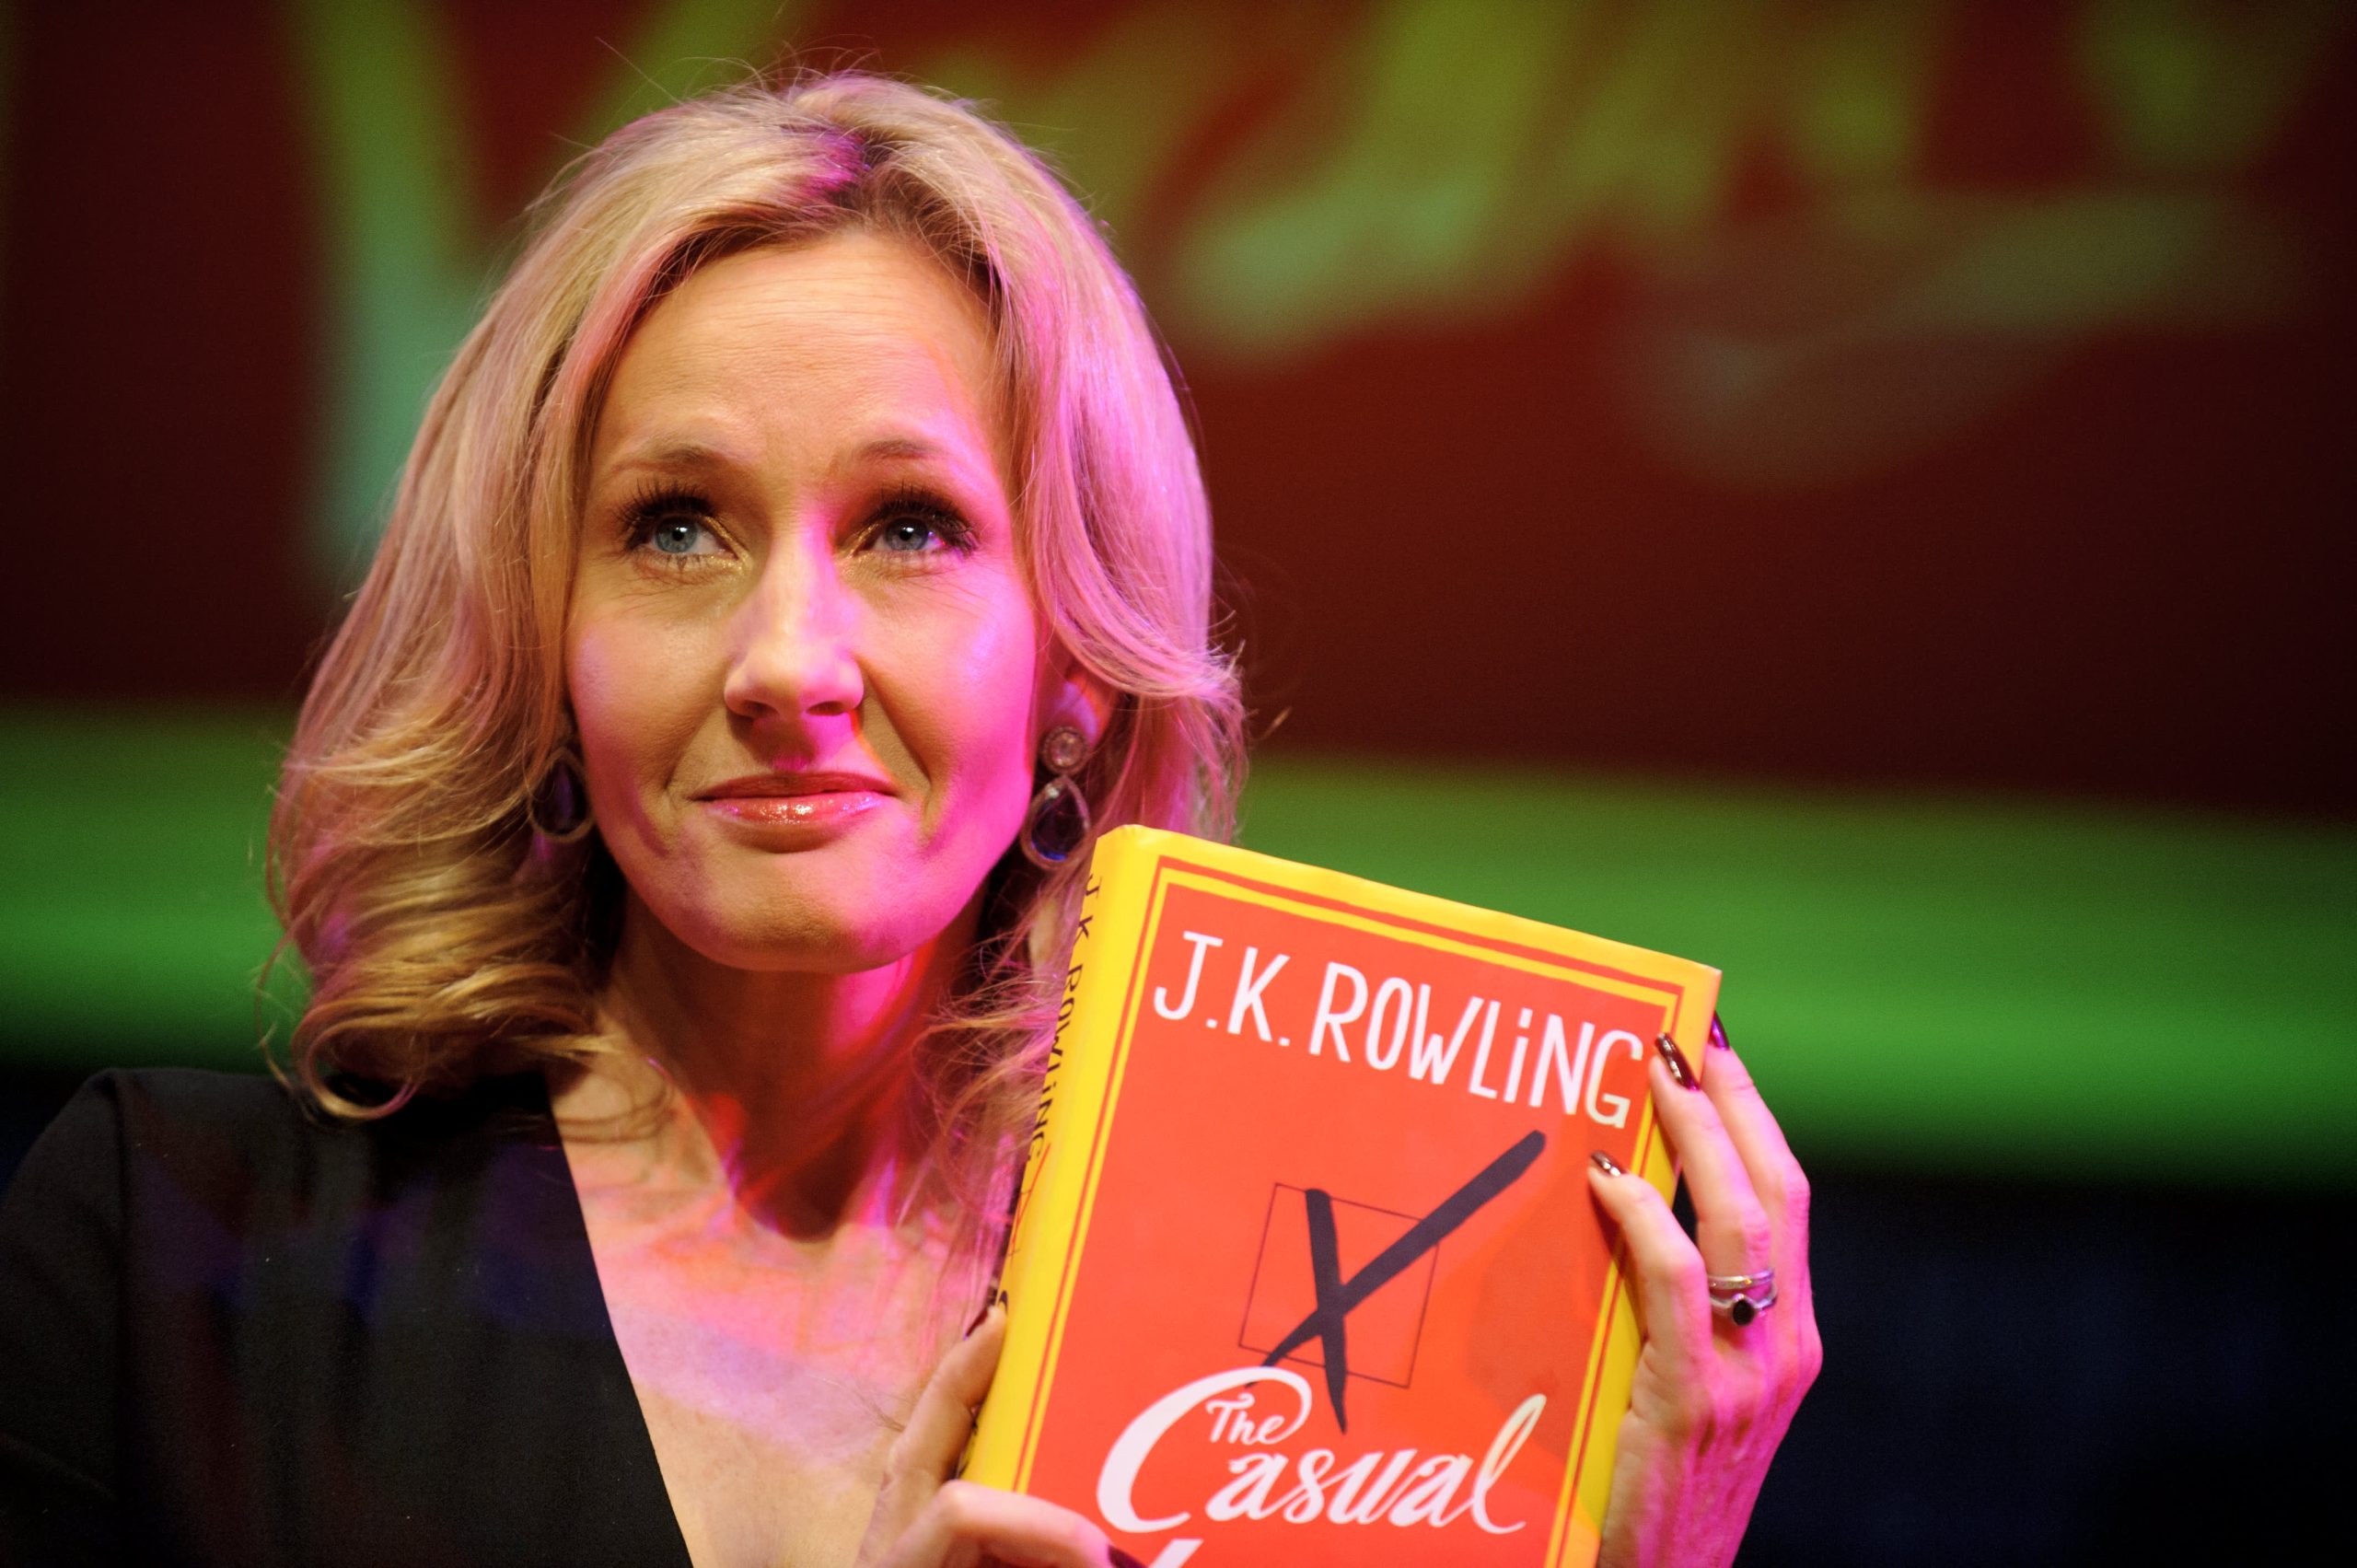 Harry Potter creator, J. K Rowling stands her ground